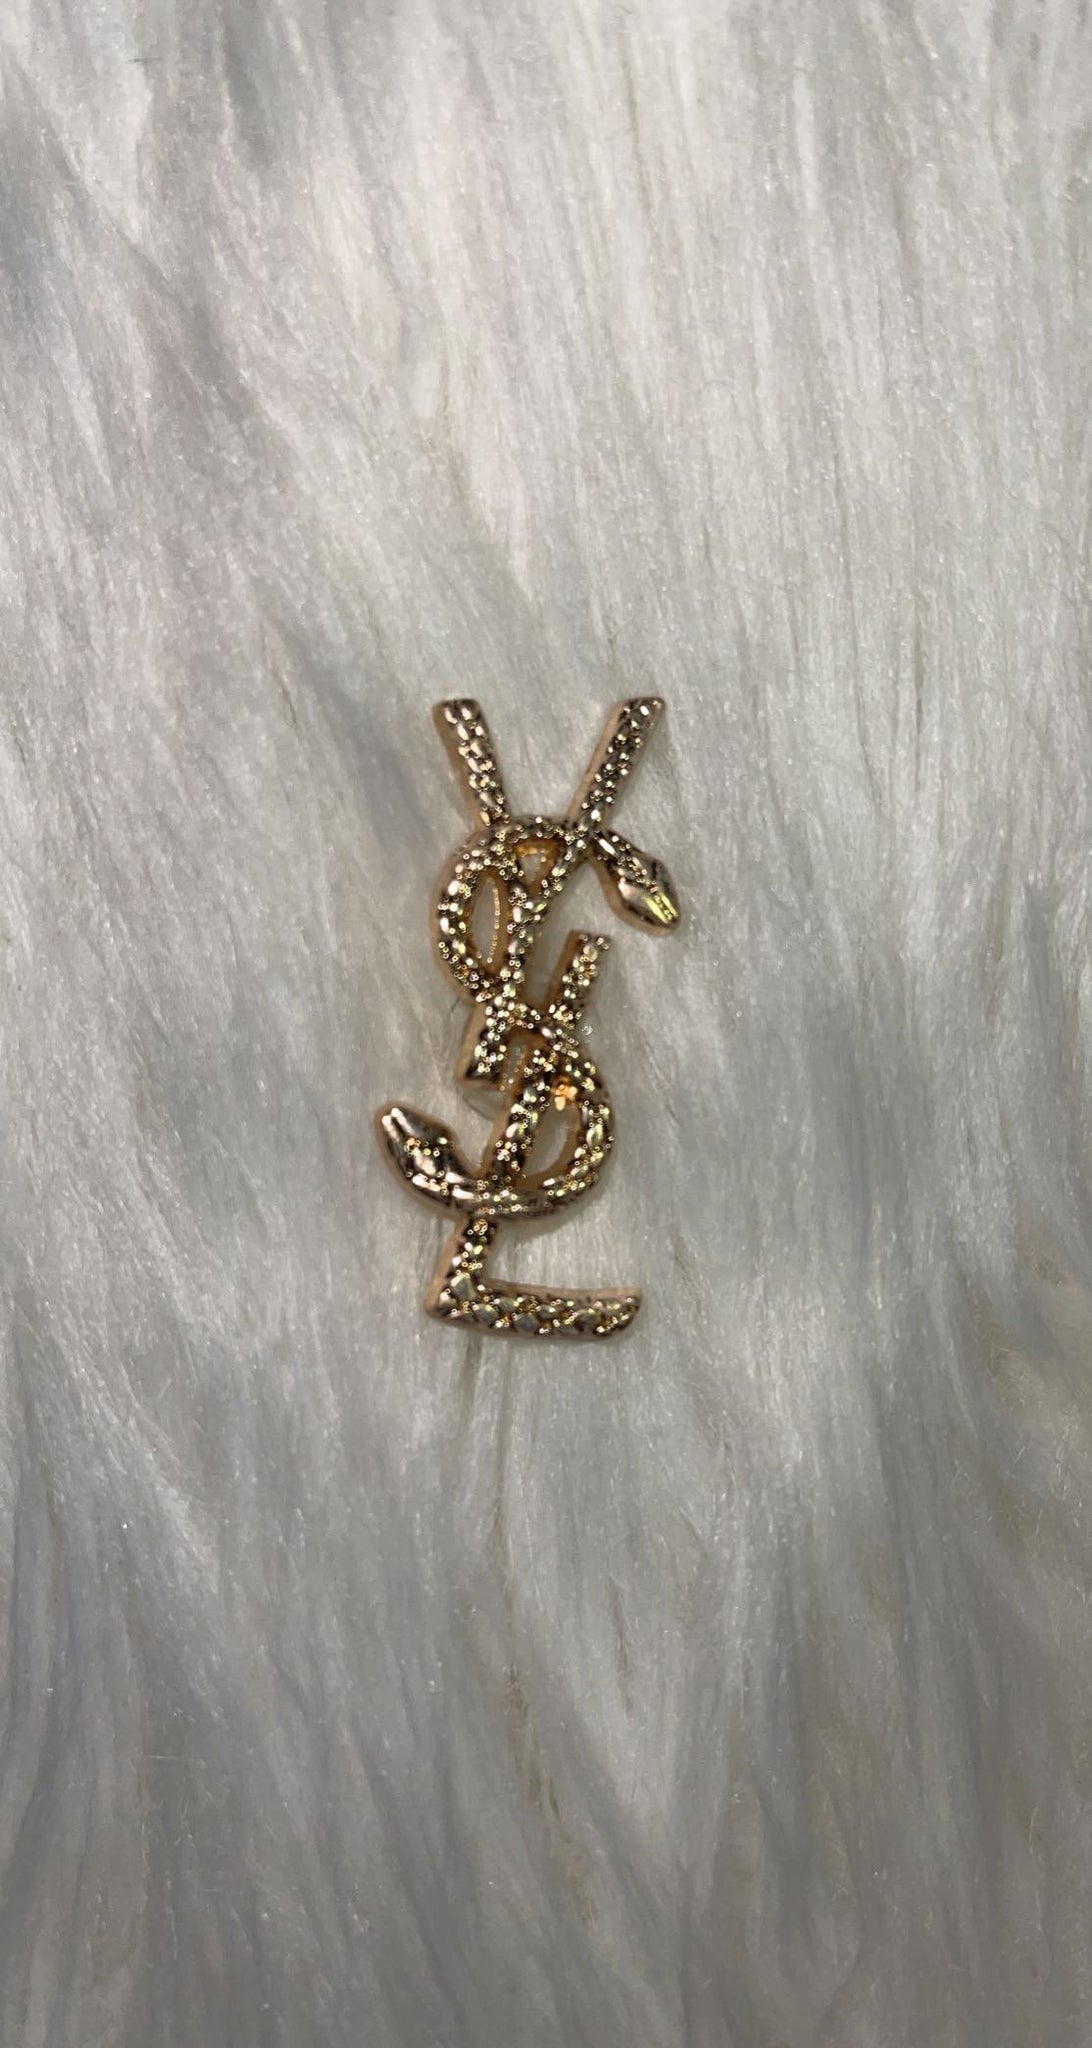 Link in my profile #croccharms #charms #crocs #lv #channel #ysl